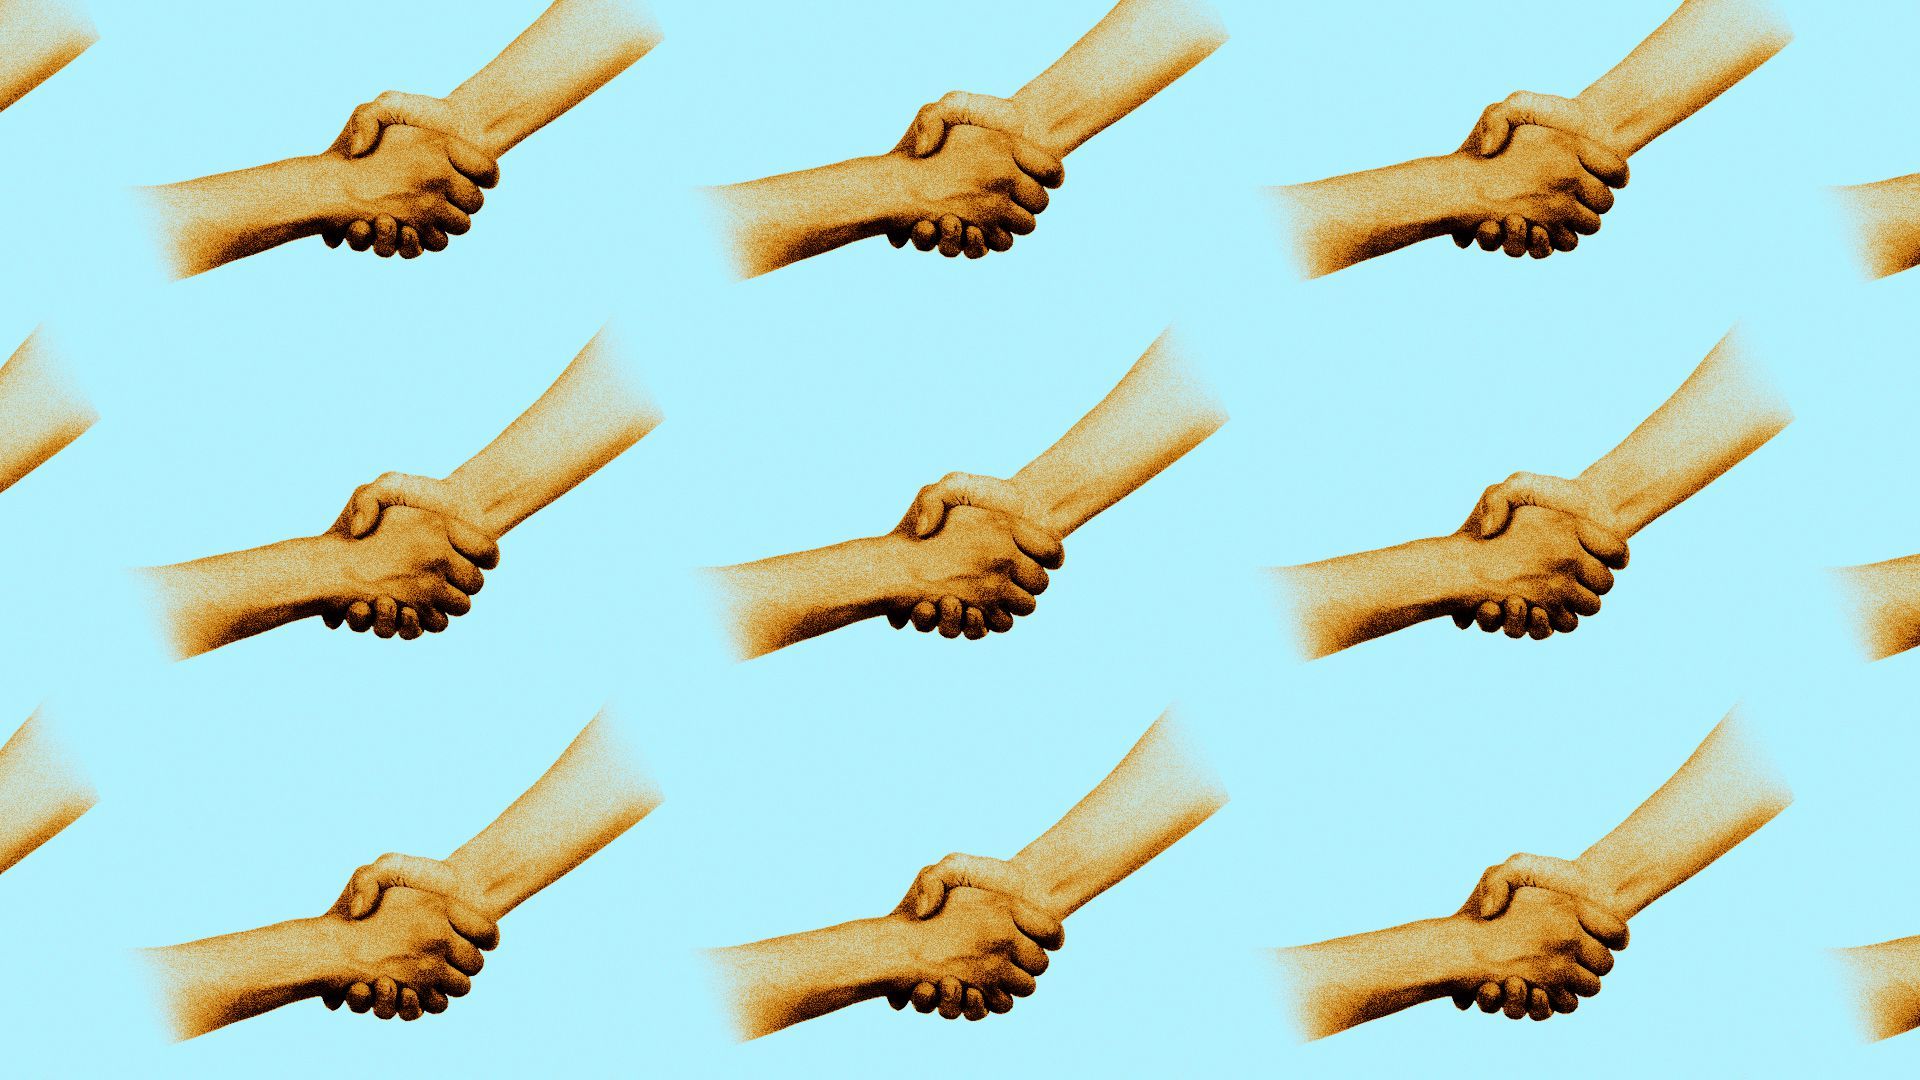 Illustration of a repeating pattern of handshakes.